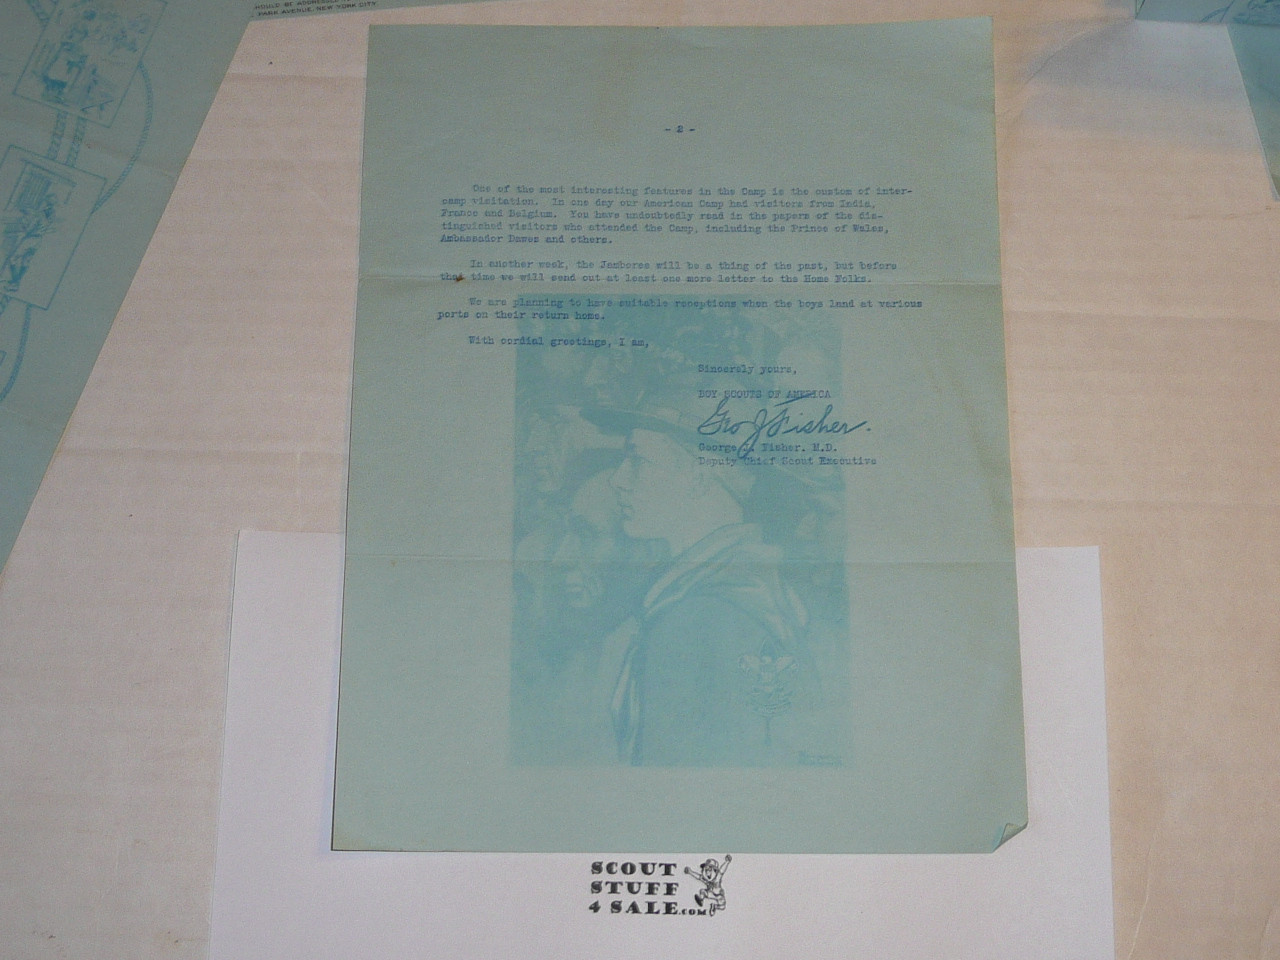 1929 World Jamboree, USA Contingent Home Folks Letter #4 from George Fisher on National BSA Letterhead